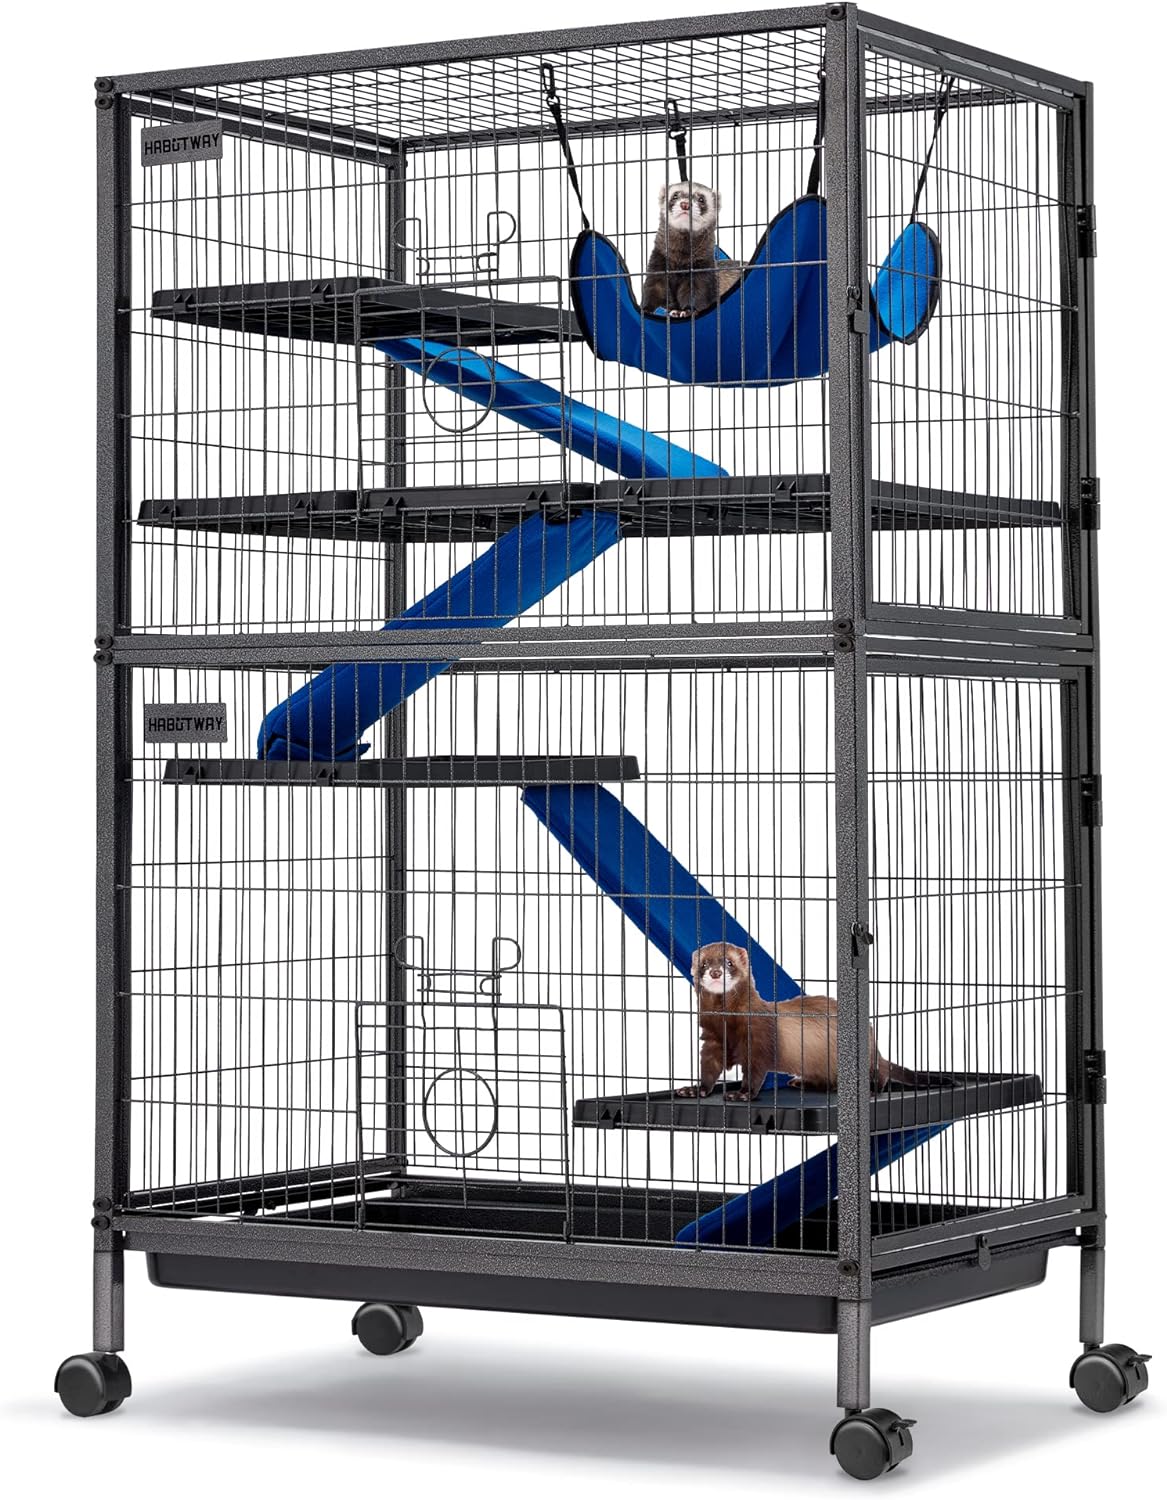 HABUTWAY 50''H Metal Small Animal Cages, Rolling Chinchilla Cage with Removable Ramps, Lagre Critter Nation Cage for Chinchillas/Guinea Pigs/Rabbit, Ferret Cages with Hammock & 5 Tiers, Black